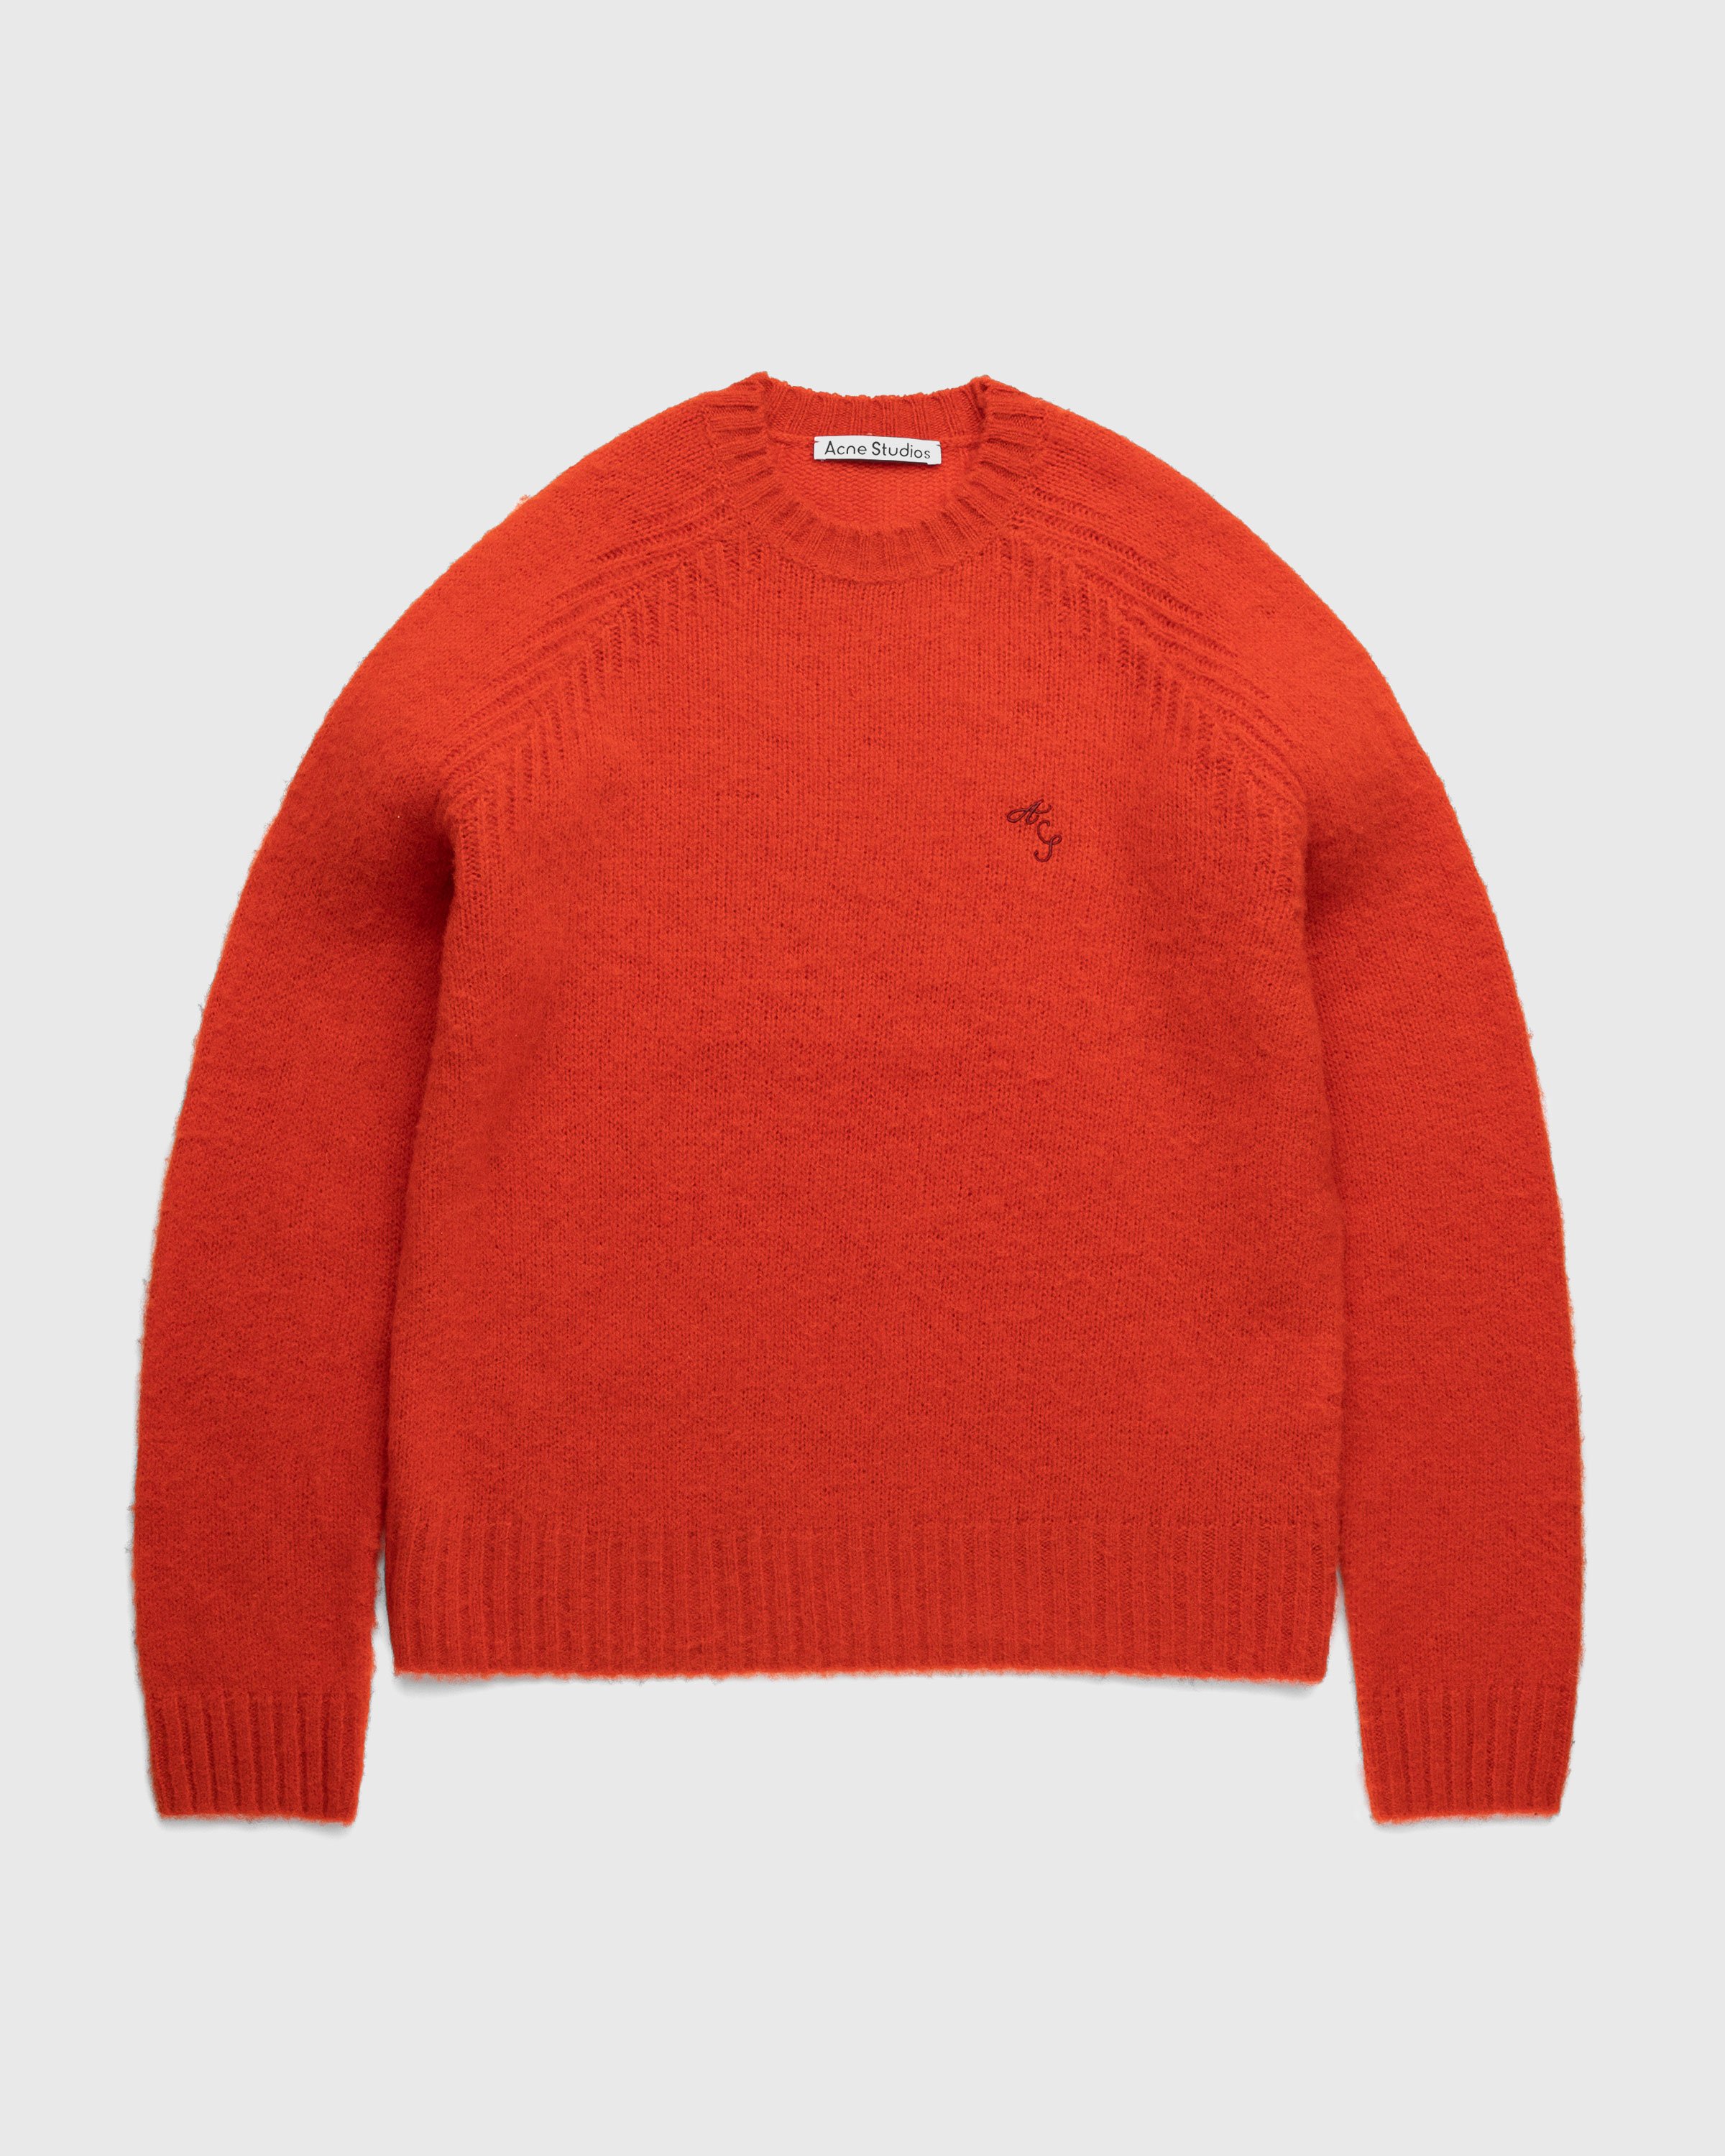 Acne Studios - Embroidered Crewneck Sweater Red - Clothing - Red - Image 1